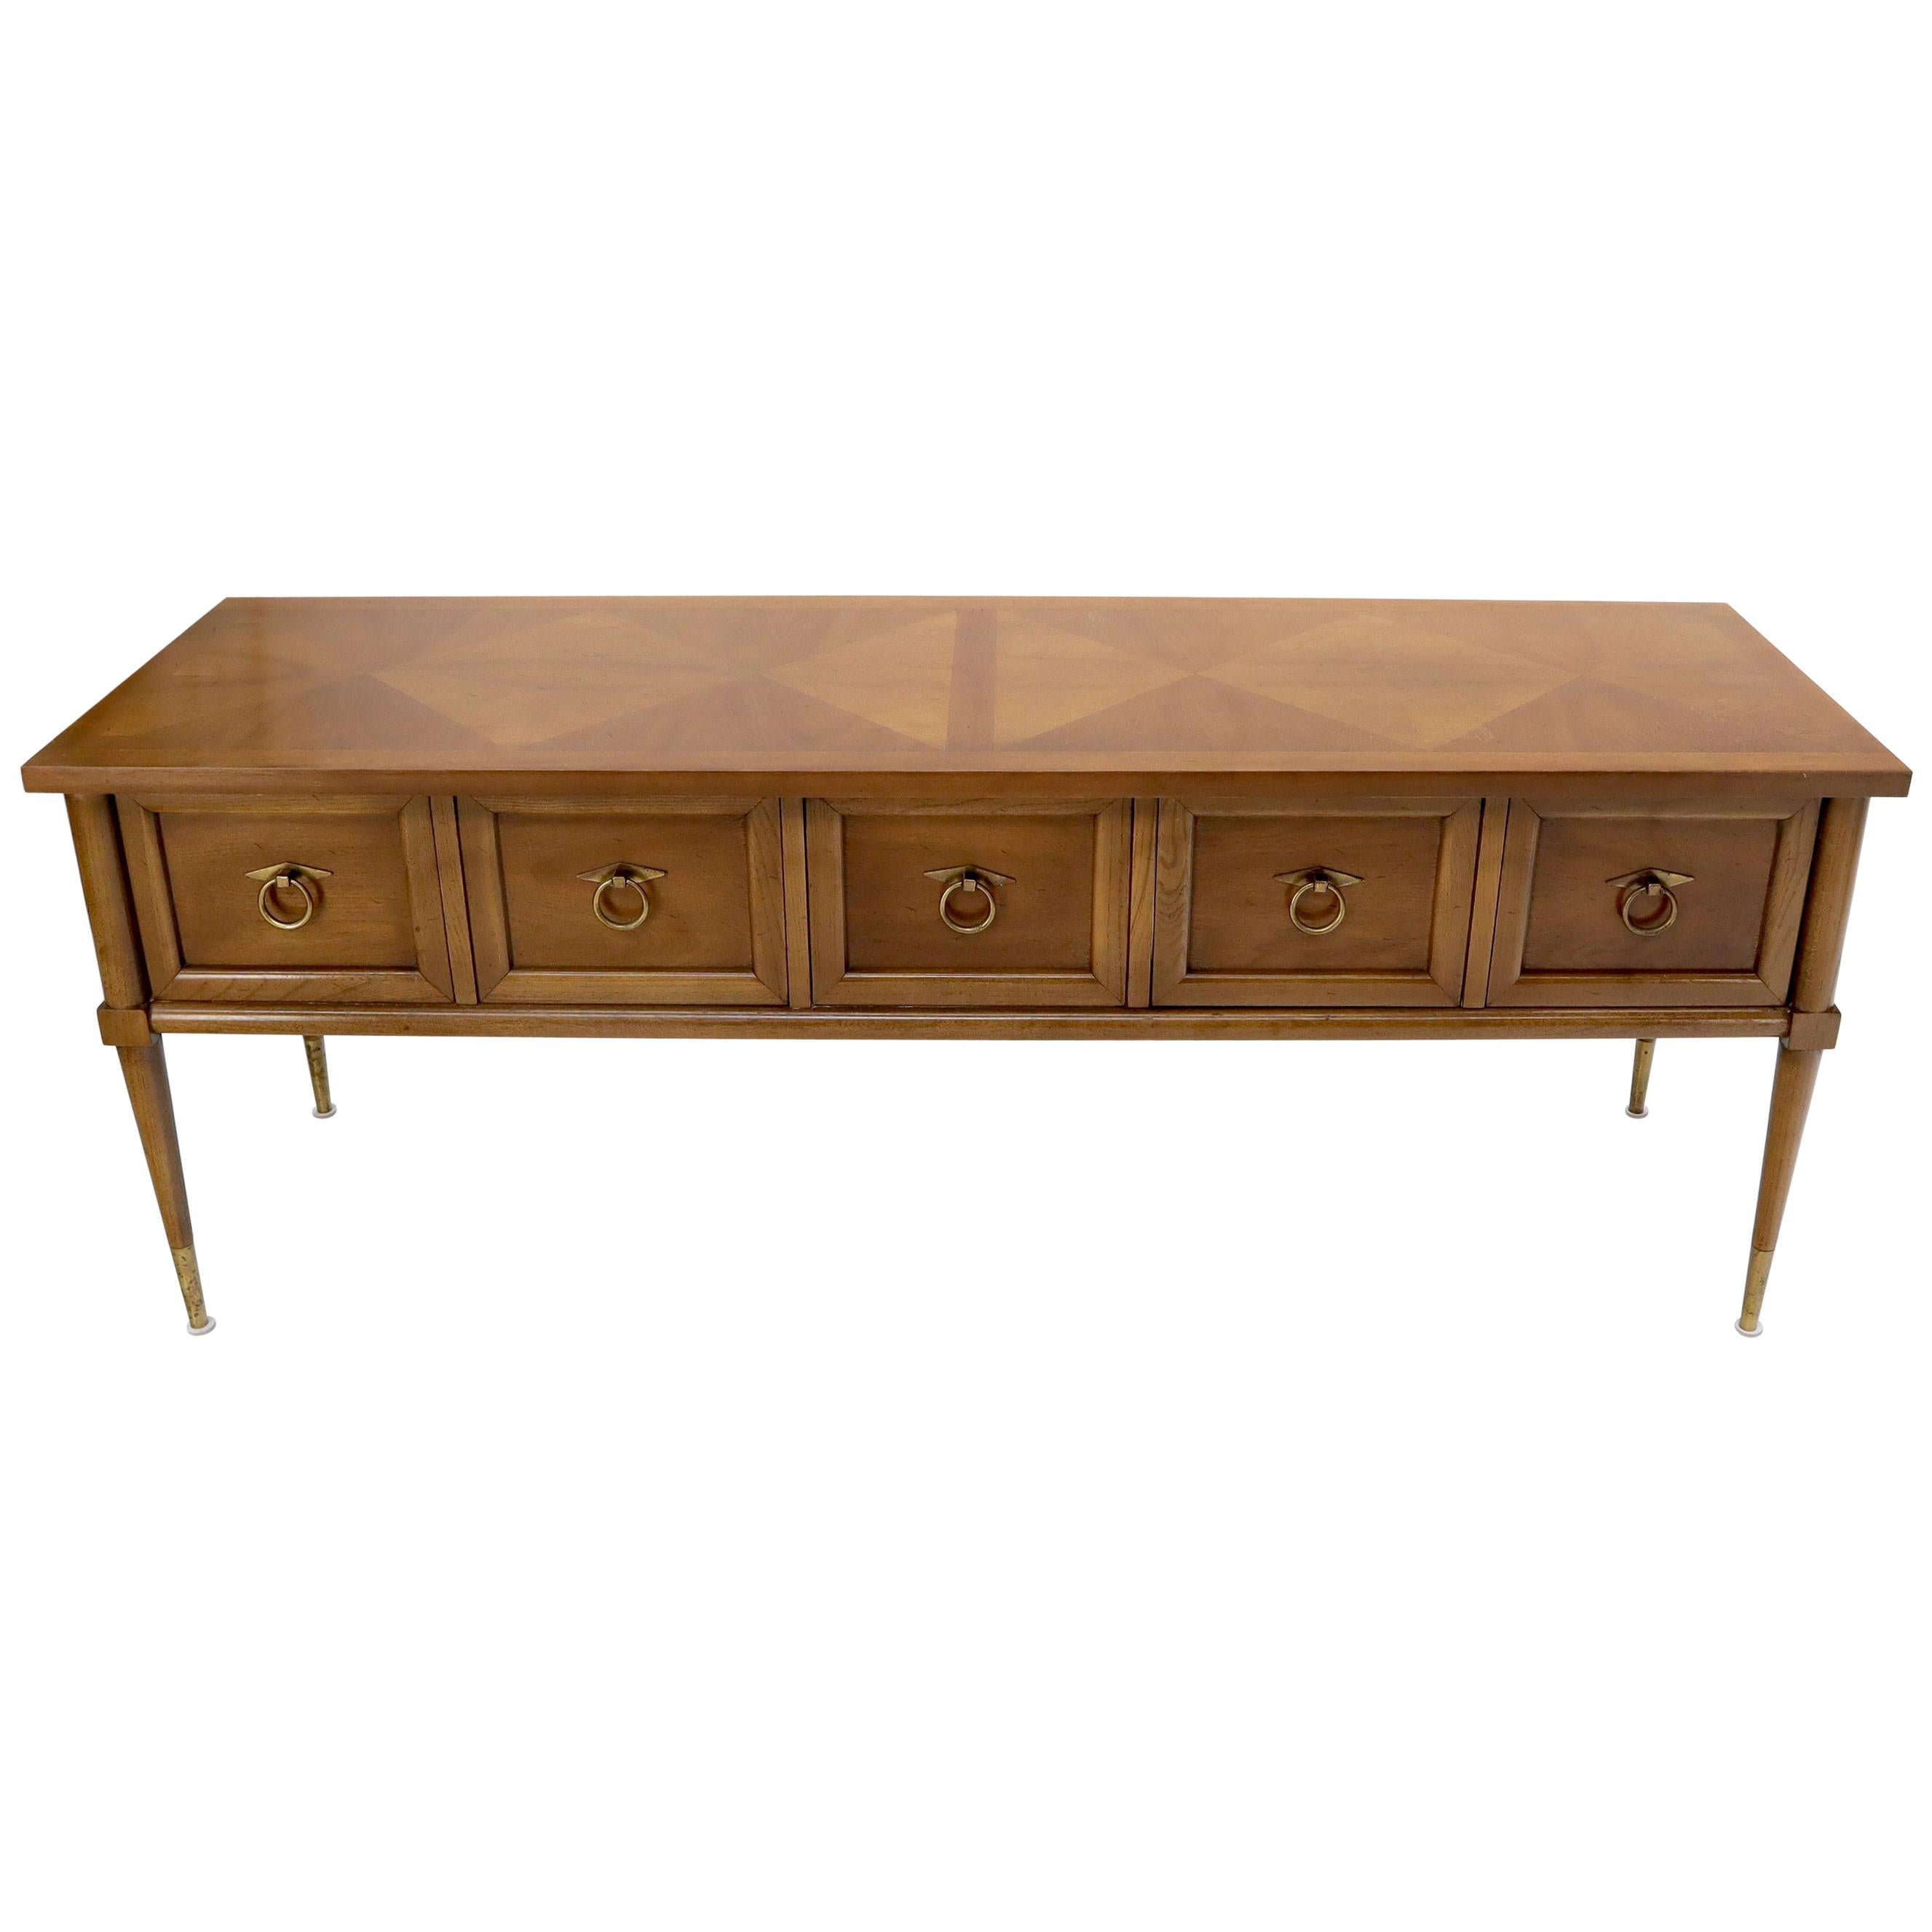 Mid-Century Modern Long Low Profile Credenza with Round Ring Drop Pulls For Sale